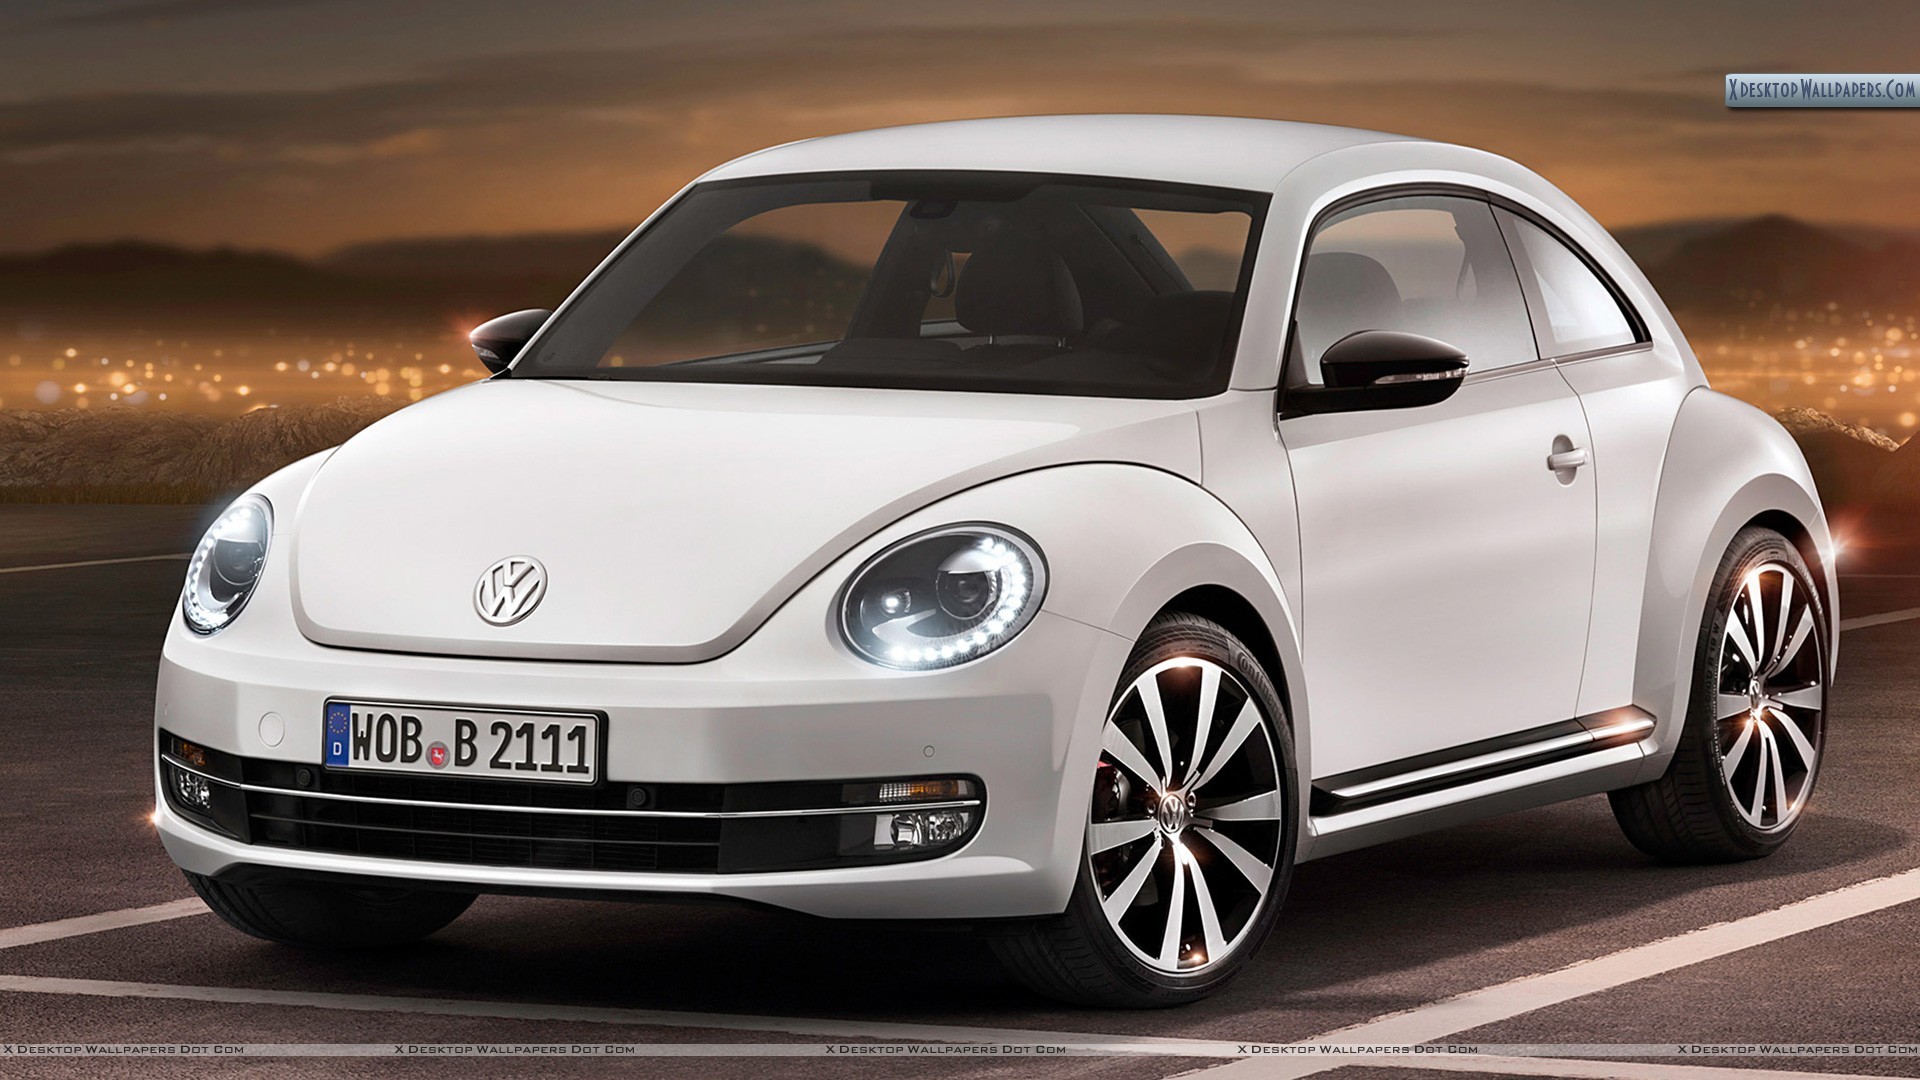 1920x1080 You are viewing wallpaper titled "2012 Volkswagen Beetle ...